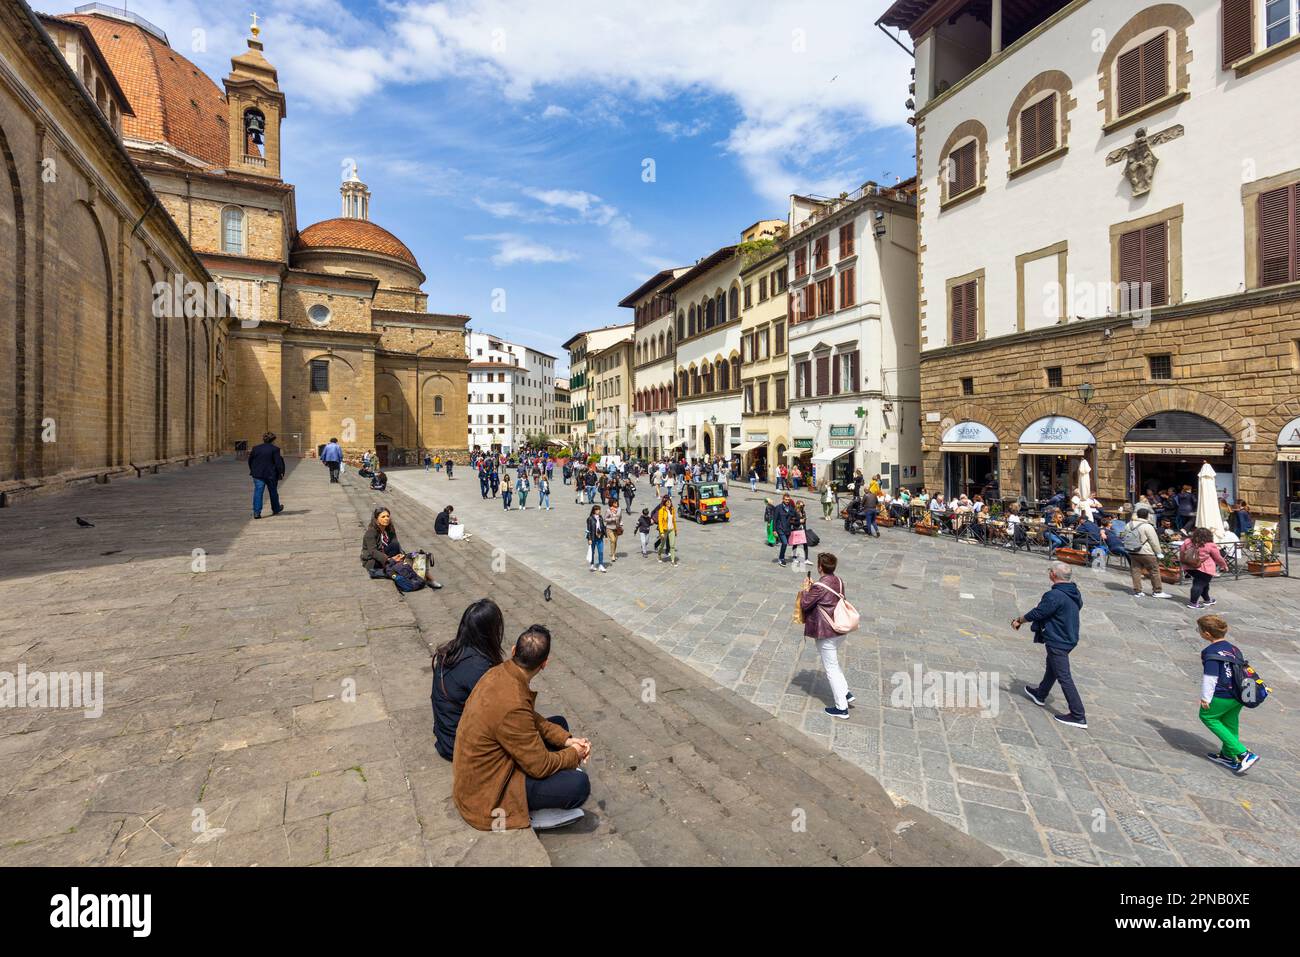 The Piazza di San Lorenzo.  The larger dome in the background belongs to the Cappelle Medicee, the Medici Chapels. Florence, Tuscany, Italy.  The hist Stock Photo